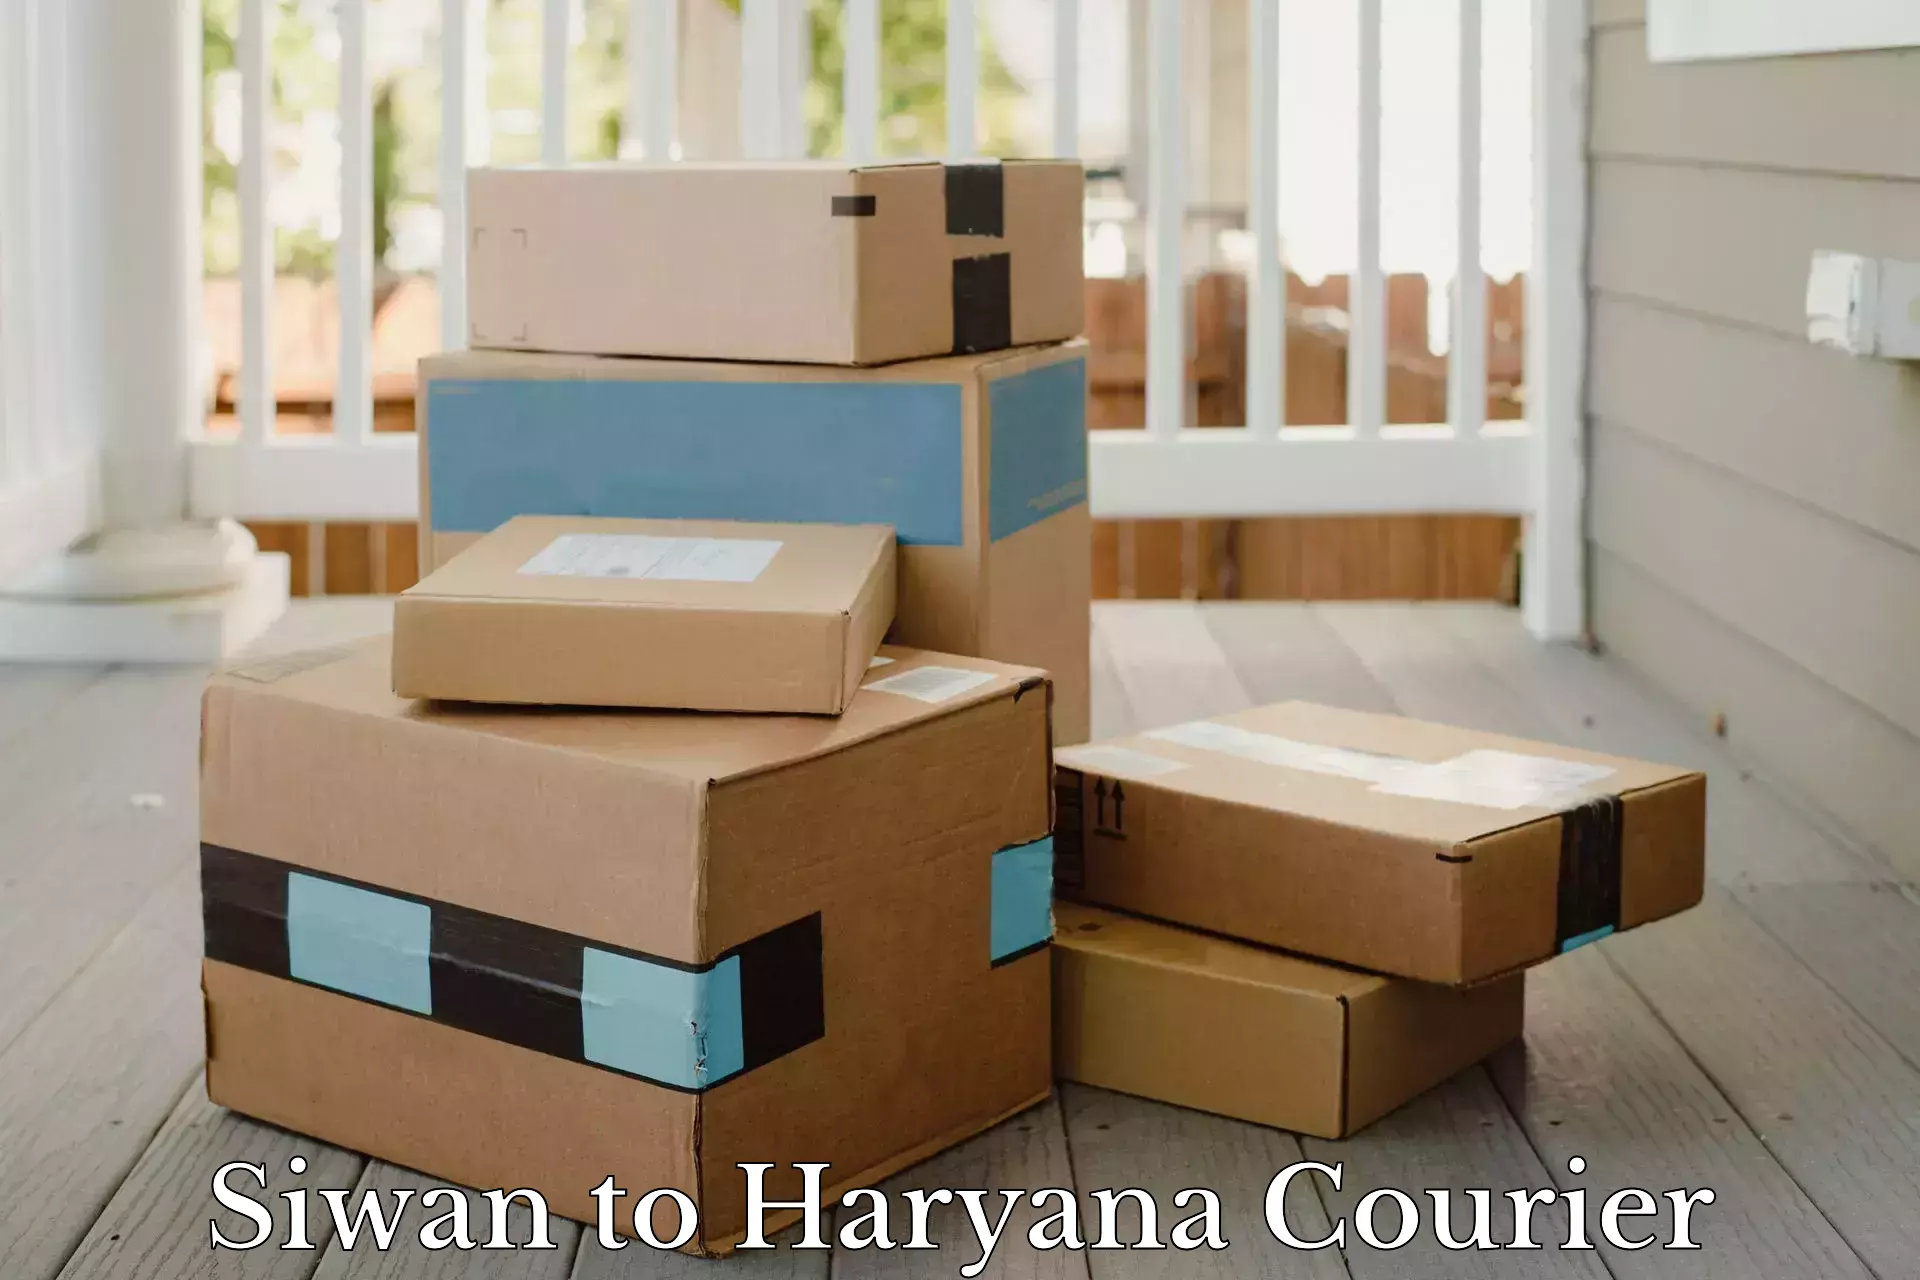 Local delivery service Siwan to Haryana